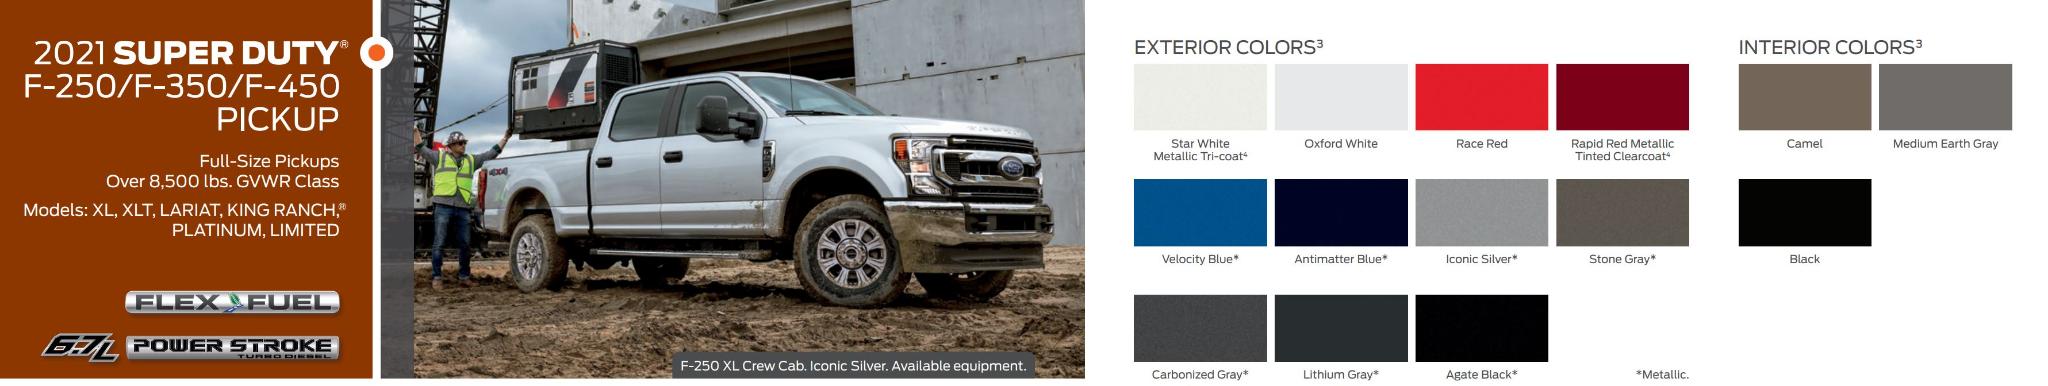 Colors used on Ford Super Duty in 2021